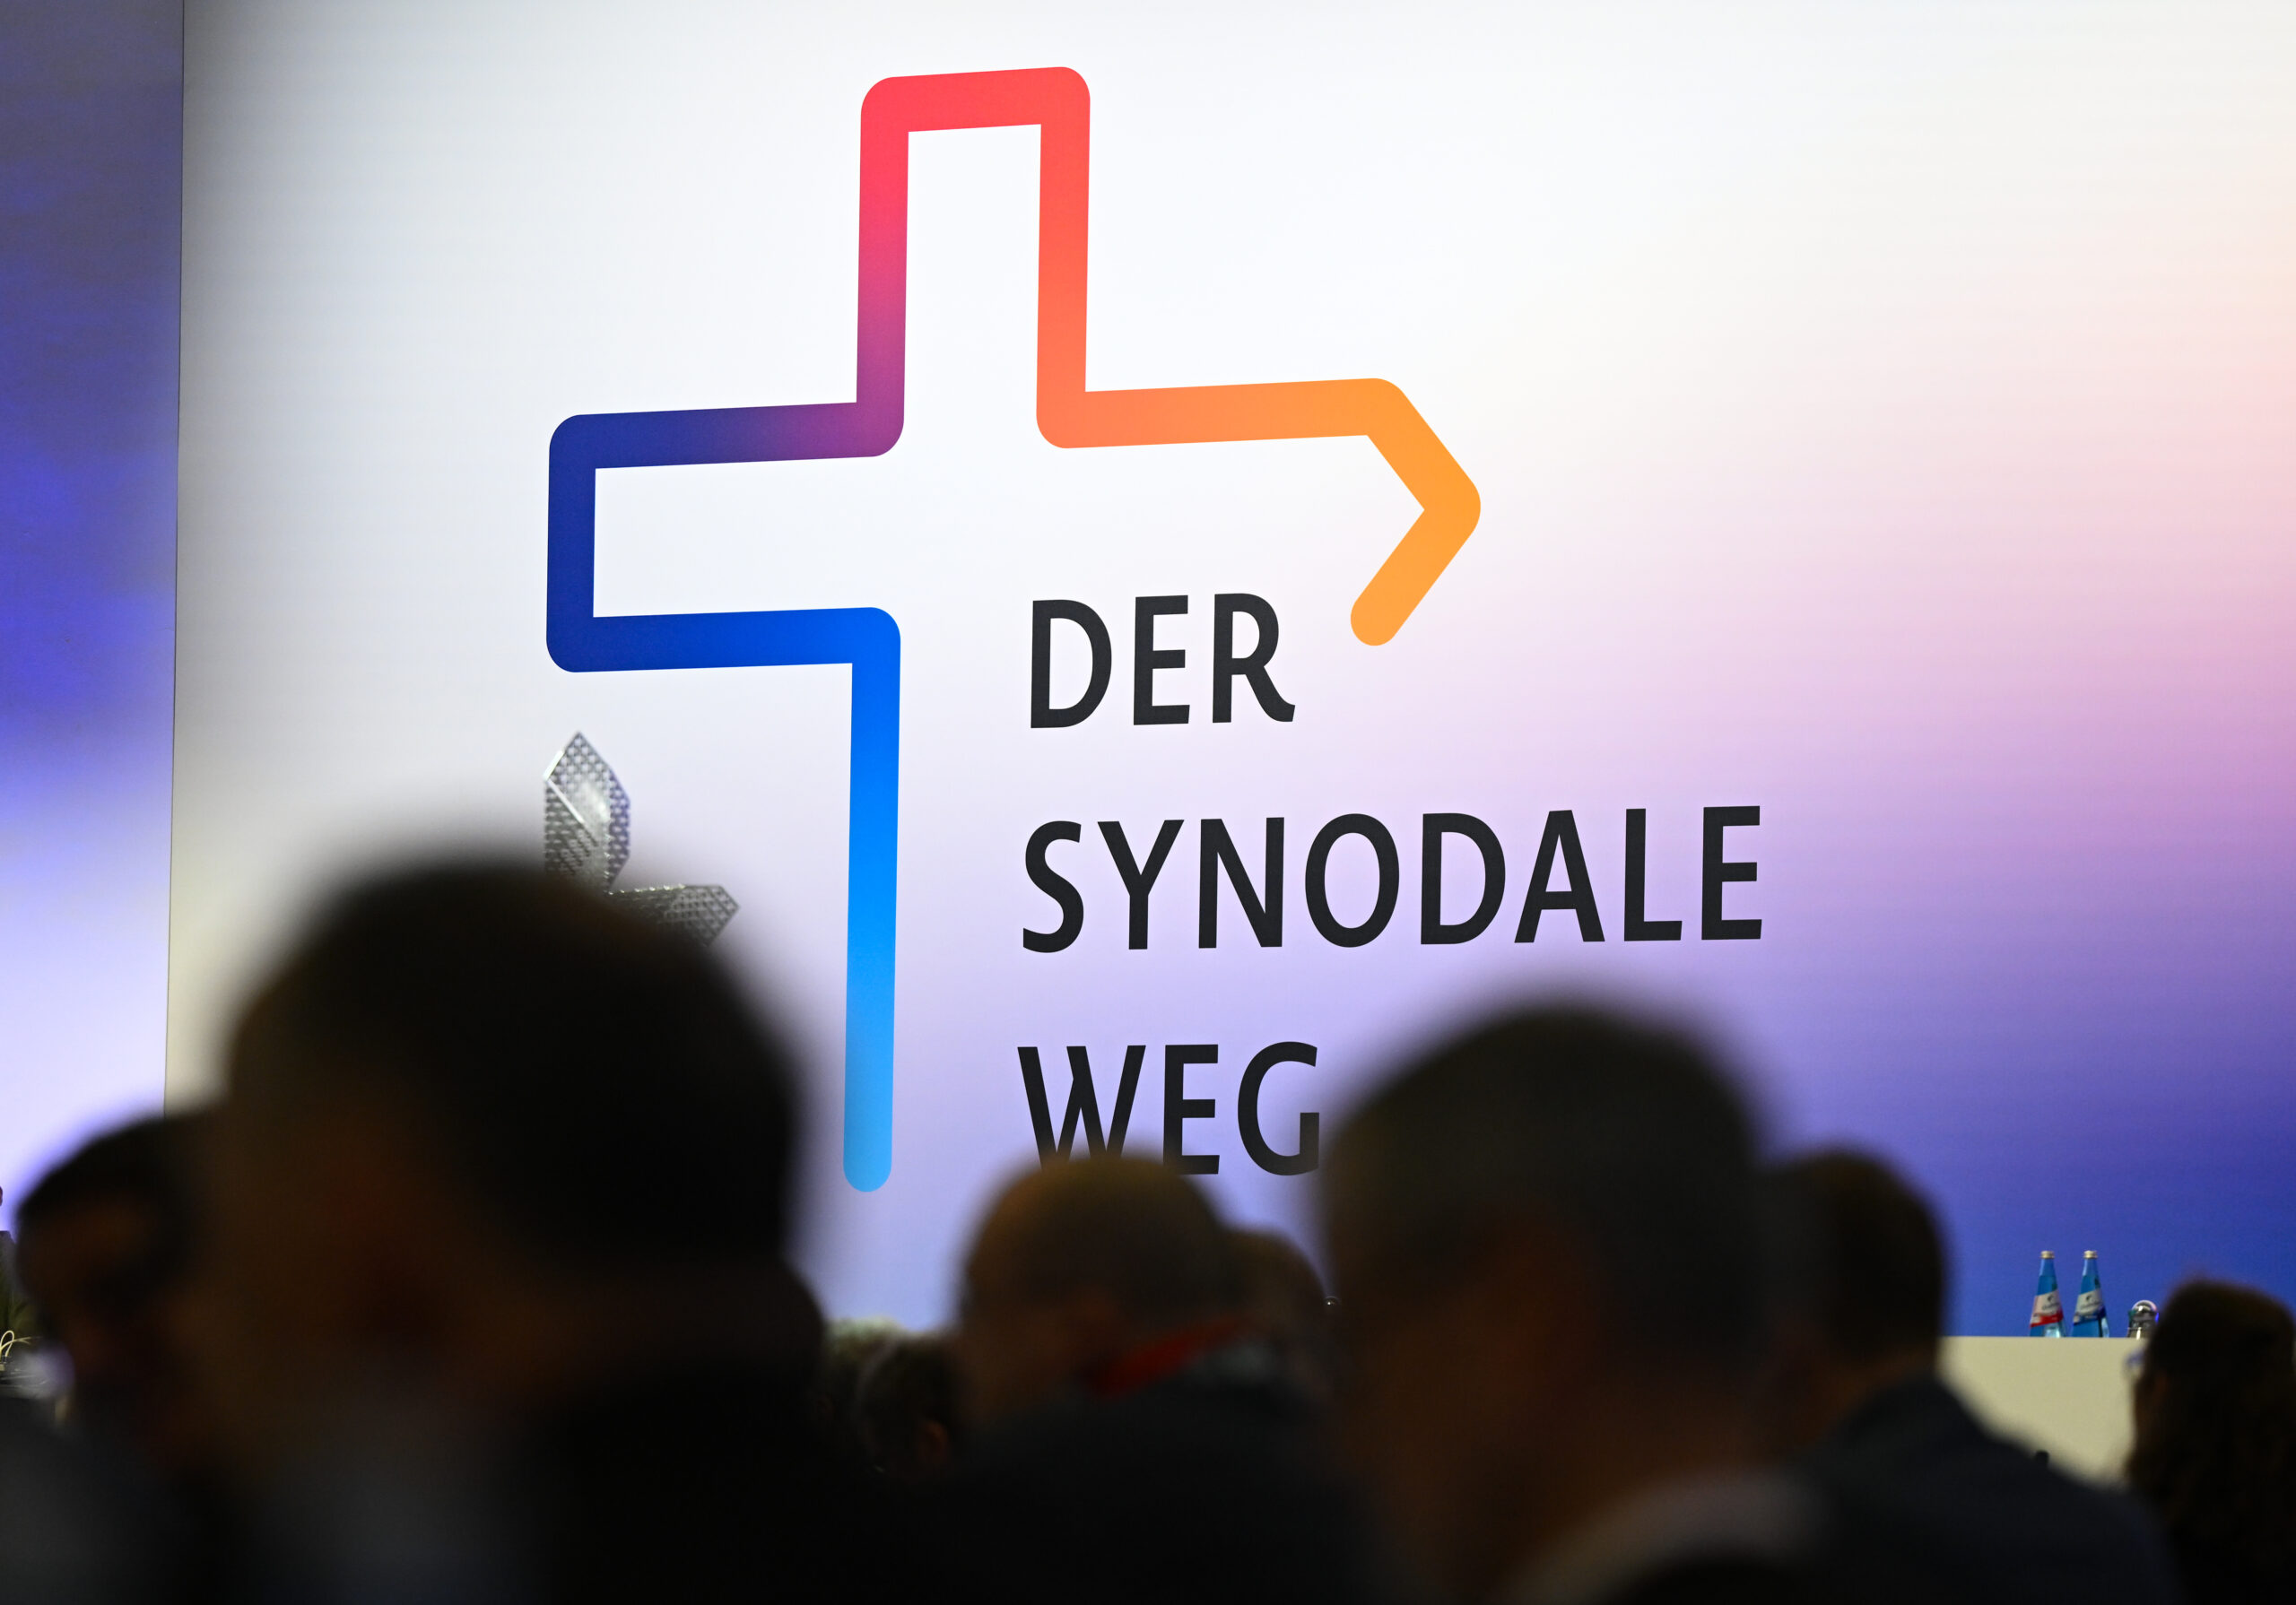 Synodal assembly decides blessing celebrations for homosexuals